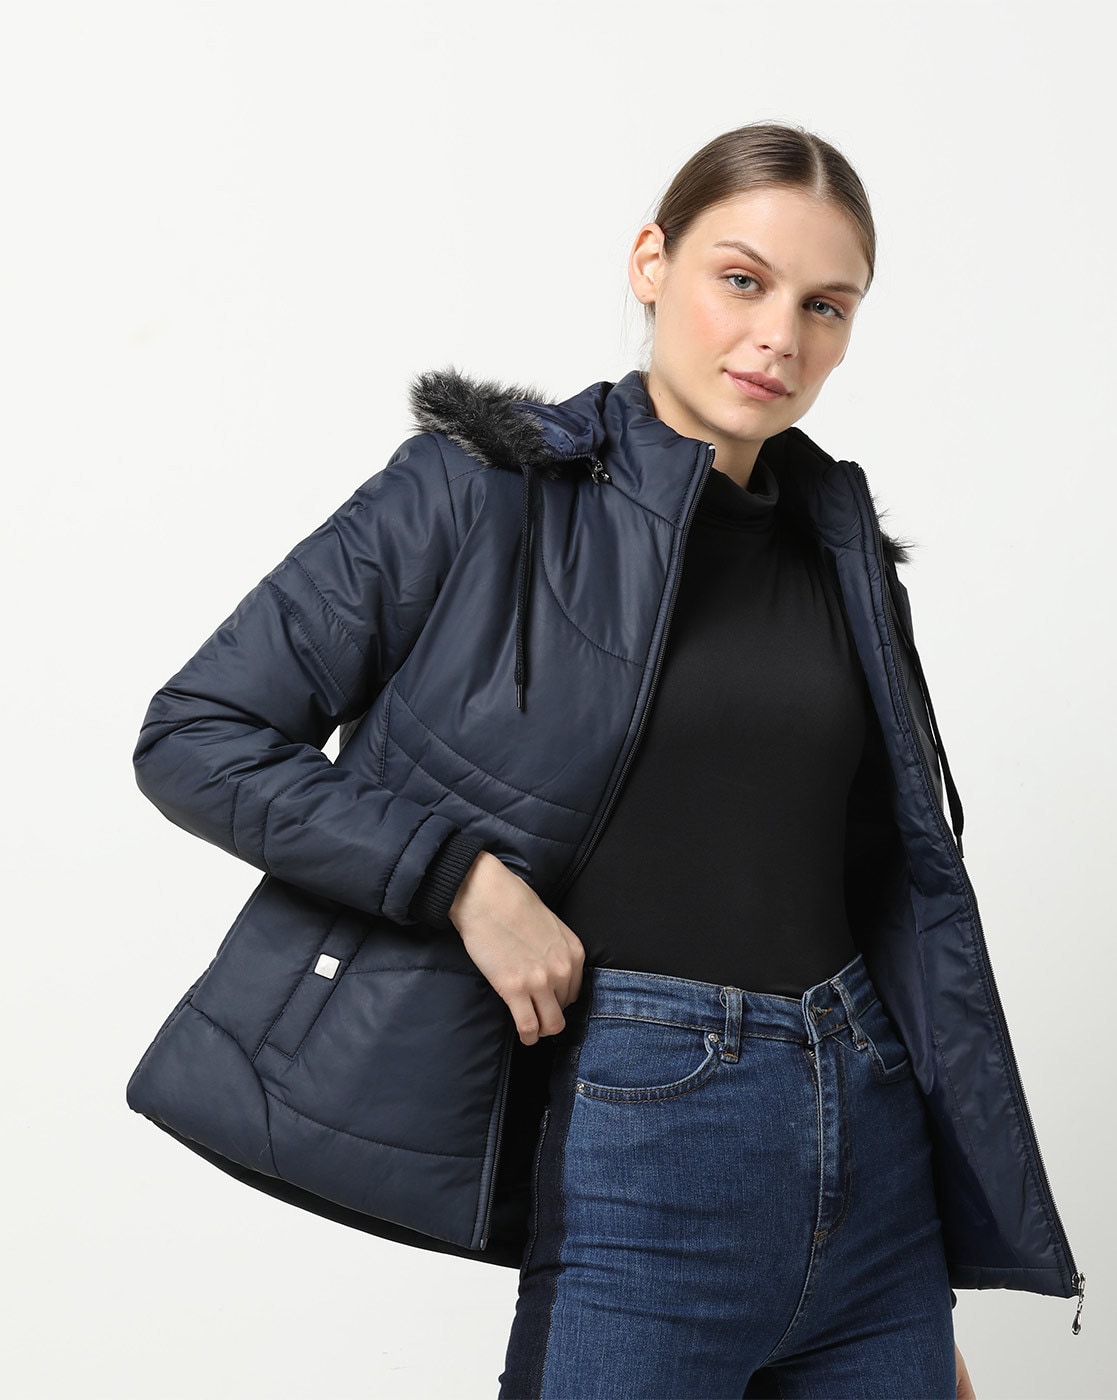 Tanu Recommends : FORT COLLINS Quilted Jacket with Detachable Fur-Lined Hood